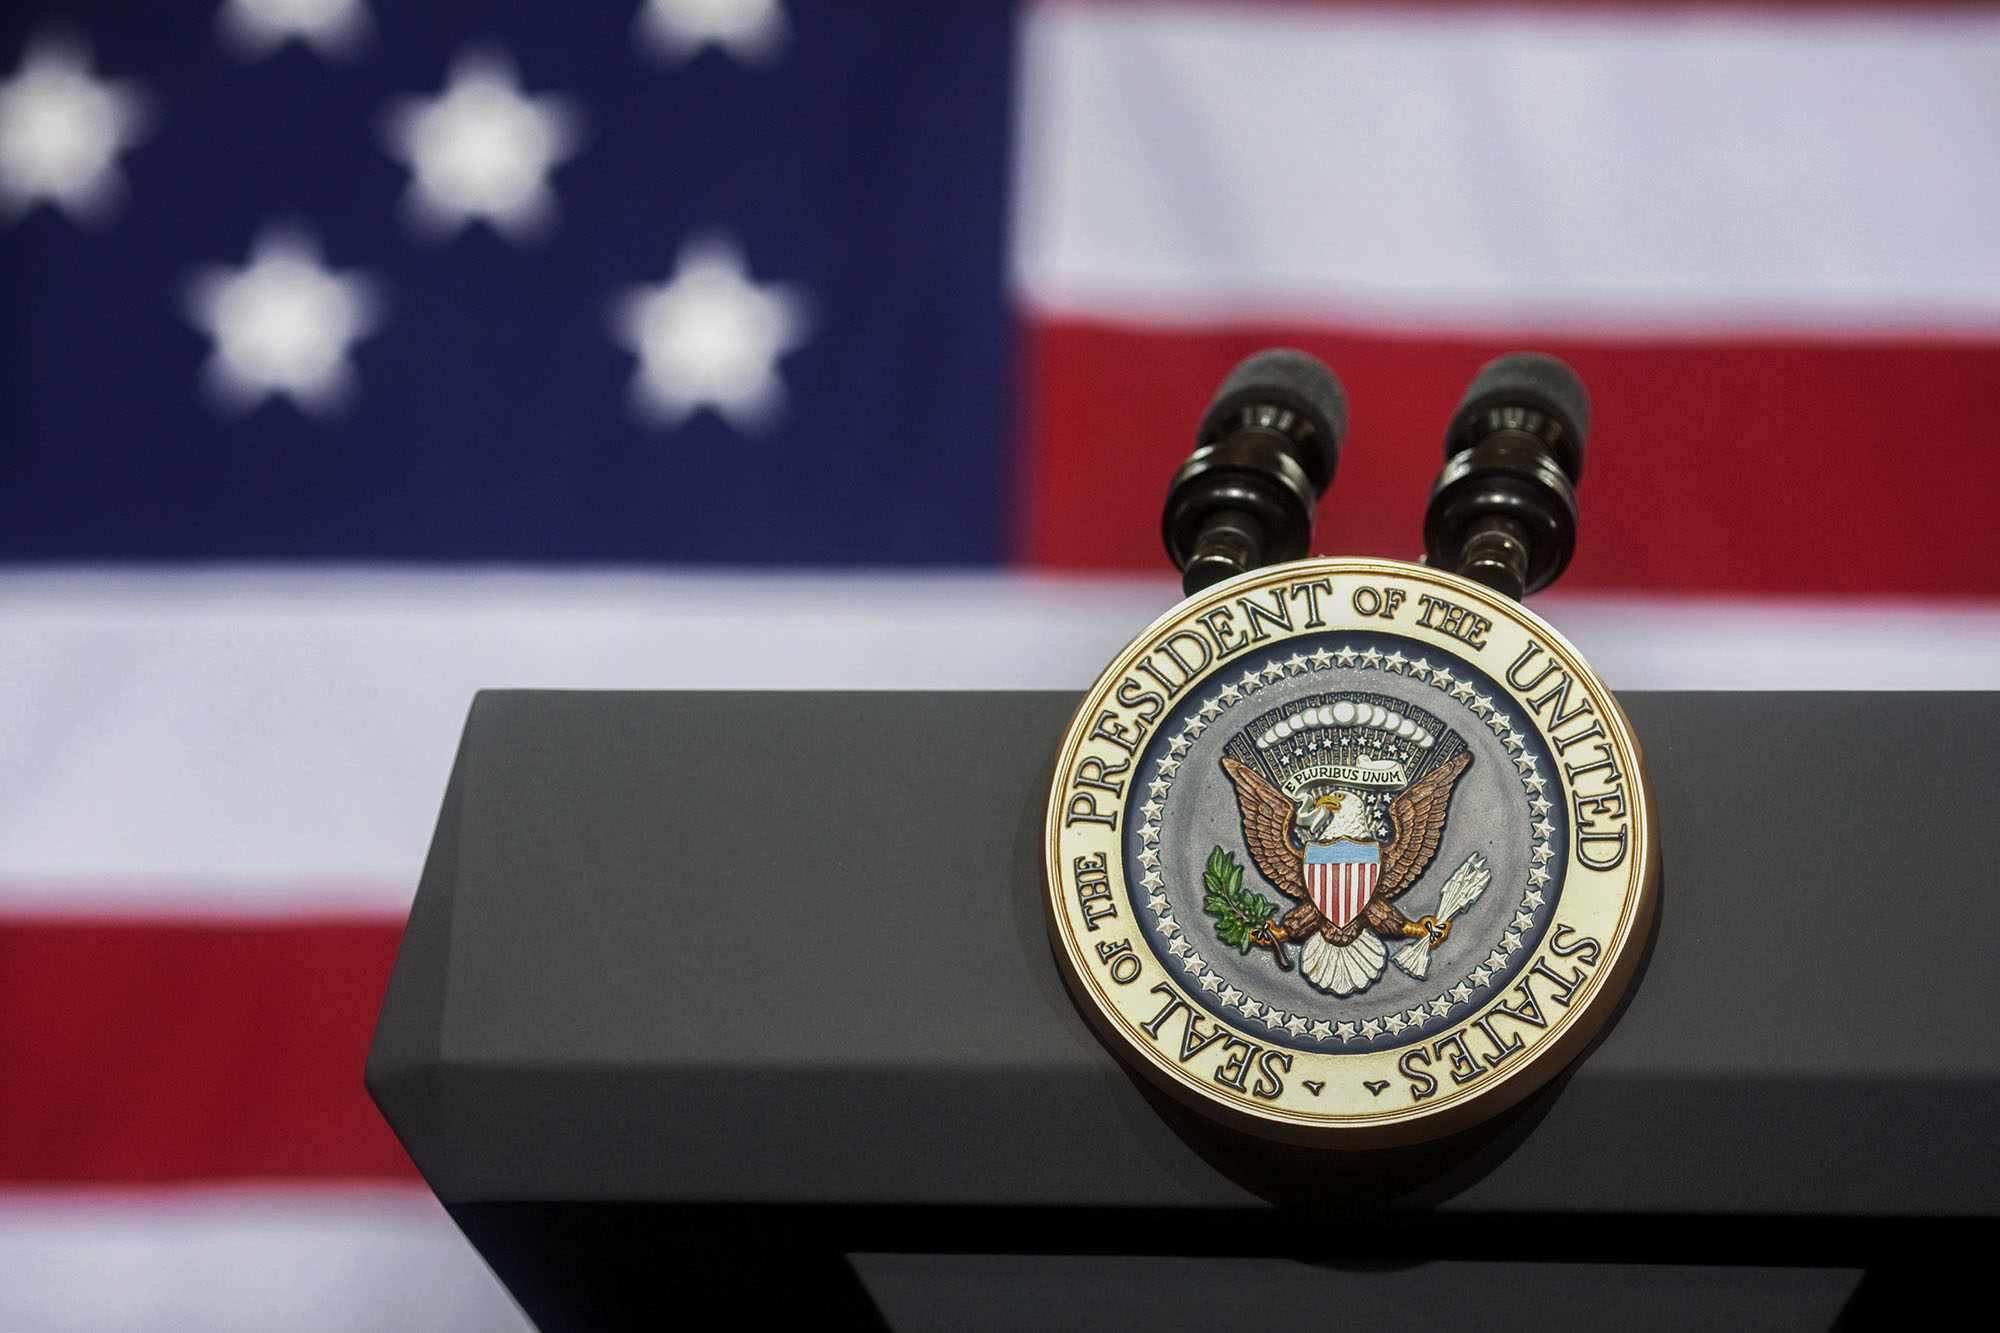 Close up view of the President of the United States' podium with the Presidential seal on it